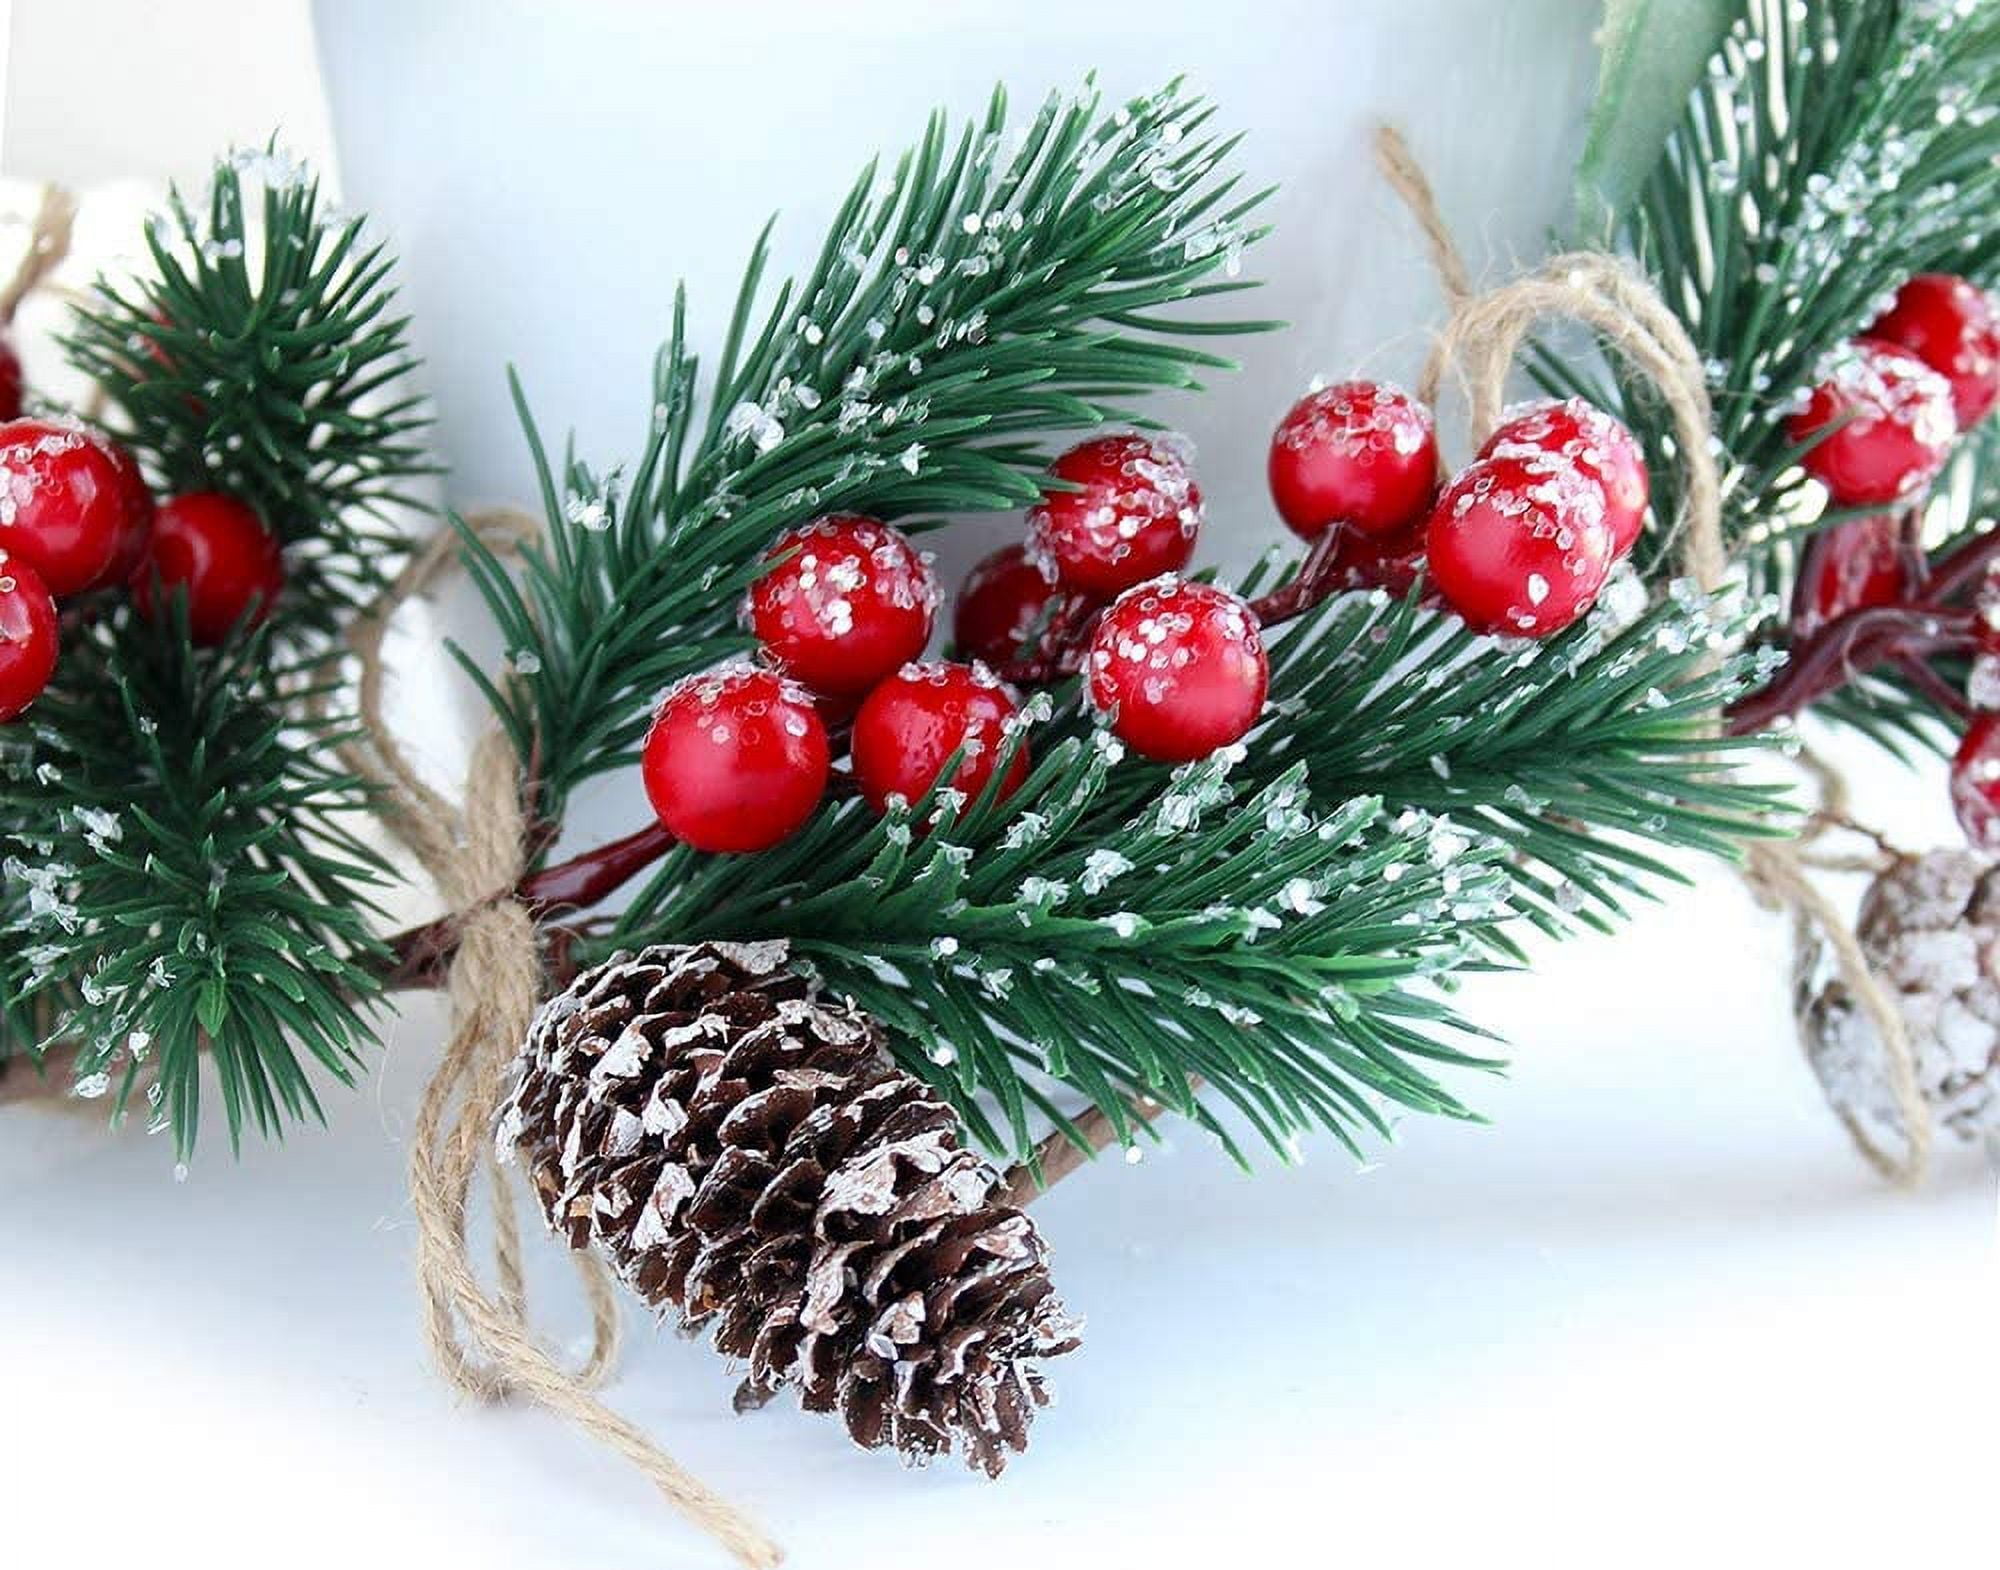 10pcs About 20cm Christmas Berries Red Stems Evergreen Pine Branches, Snow  Flocked Red Holly Berry Pine Cone Floral Sprays Decoration,Winter Holiday  Floral Picks for Decoration DIY Xmas Garland Wreath Ornaments